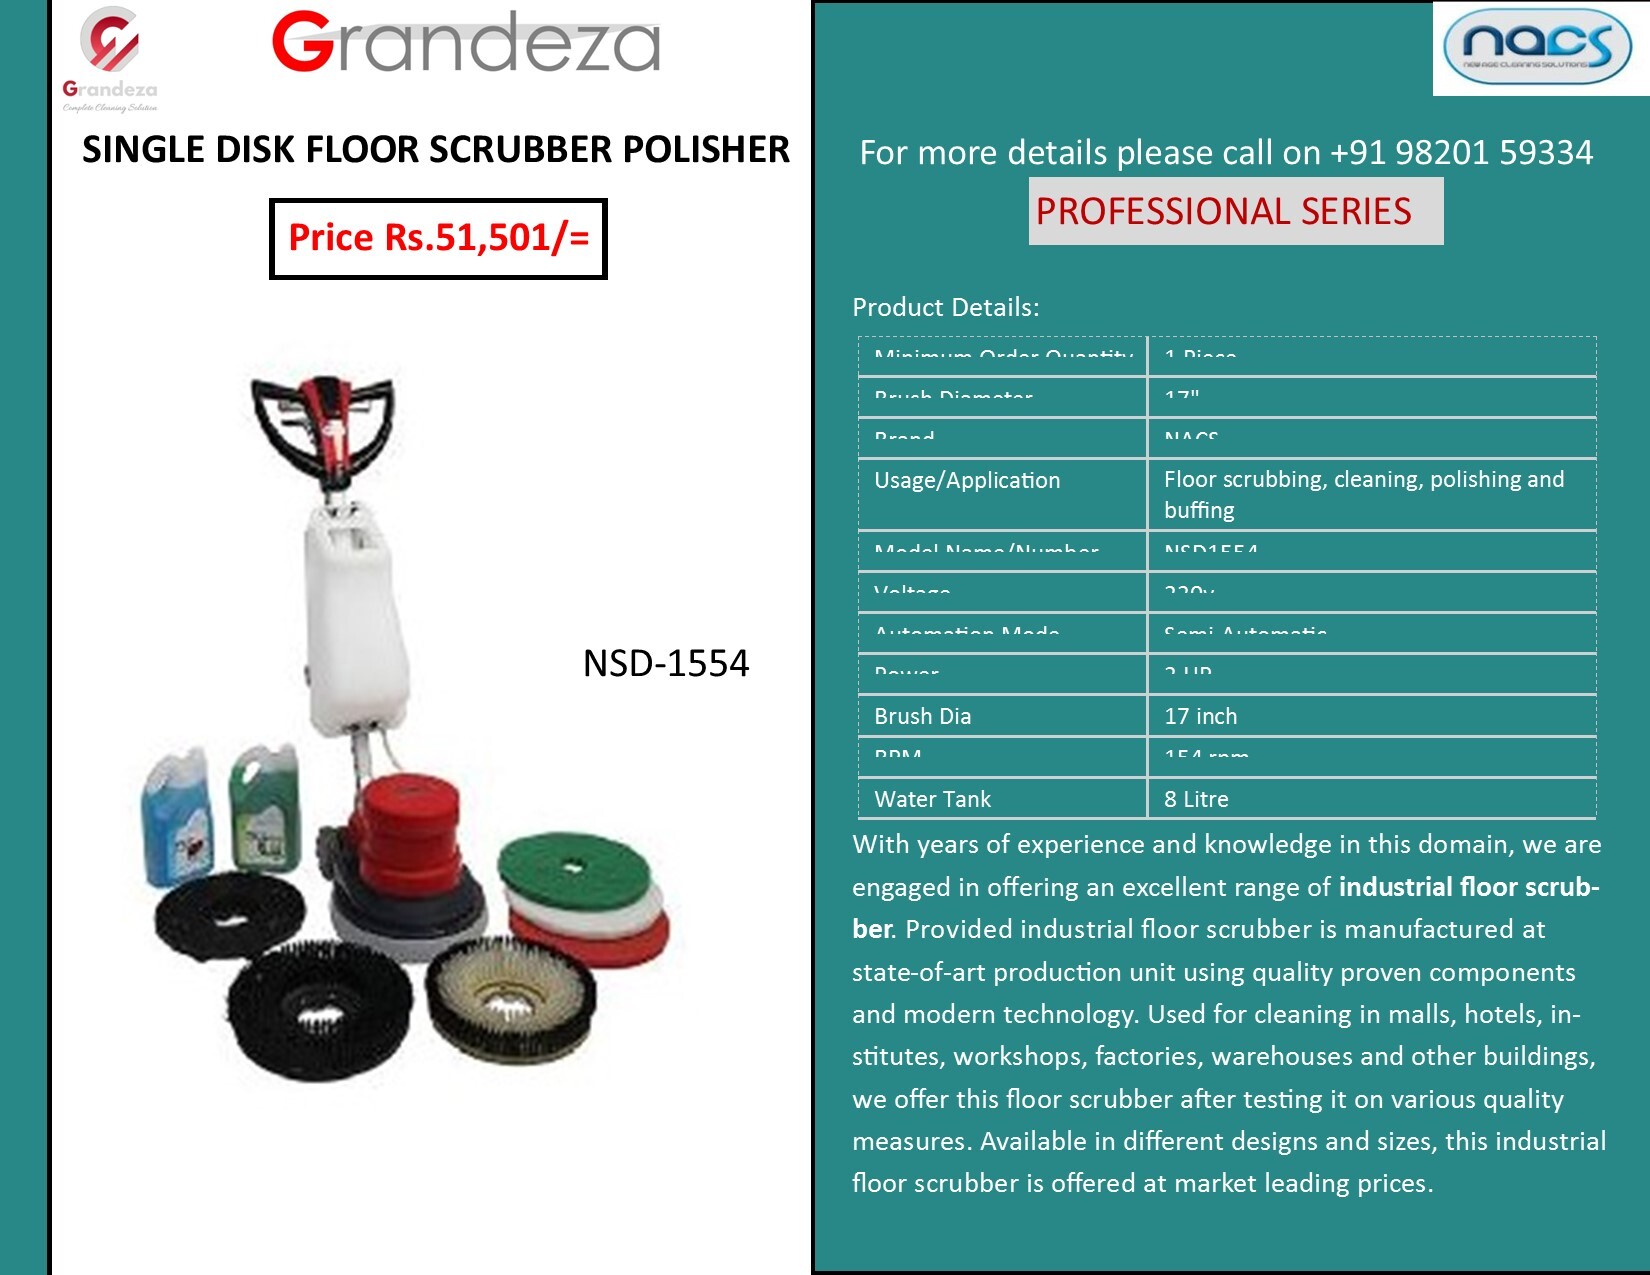 NACS Single Disk Floor Scrubber and Polisher NSD-1554